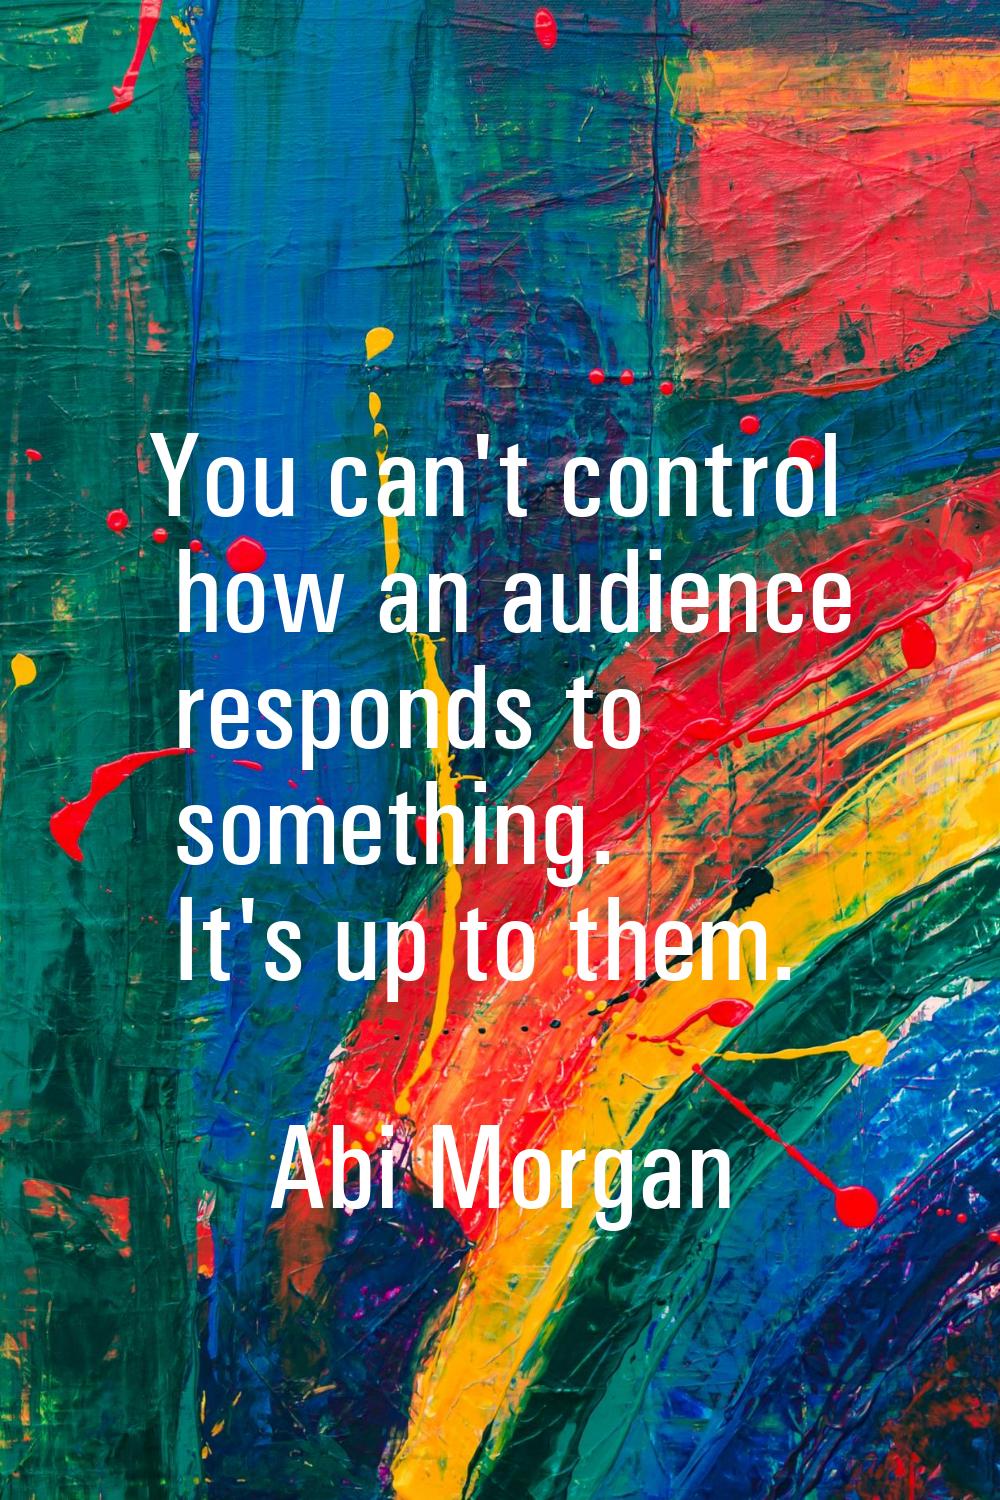 You can't control how an audience responds to something. It's up to them.